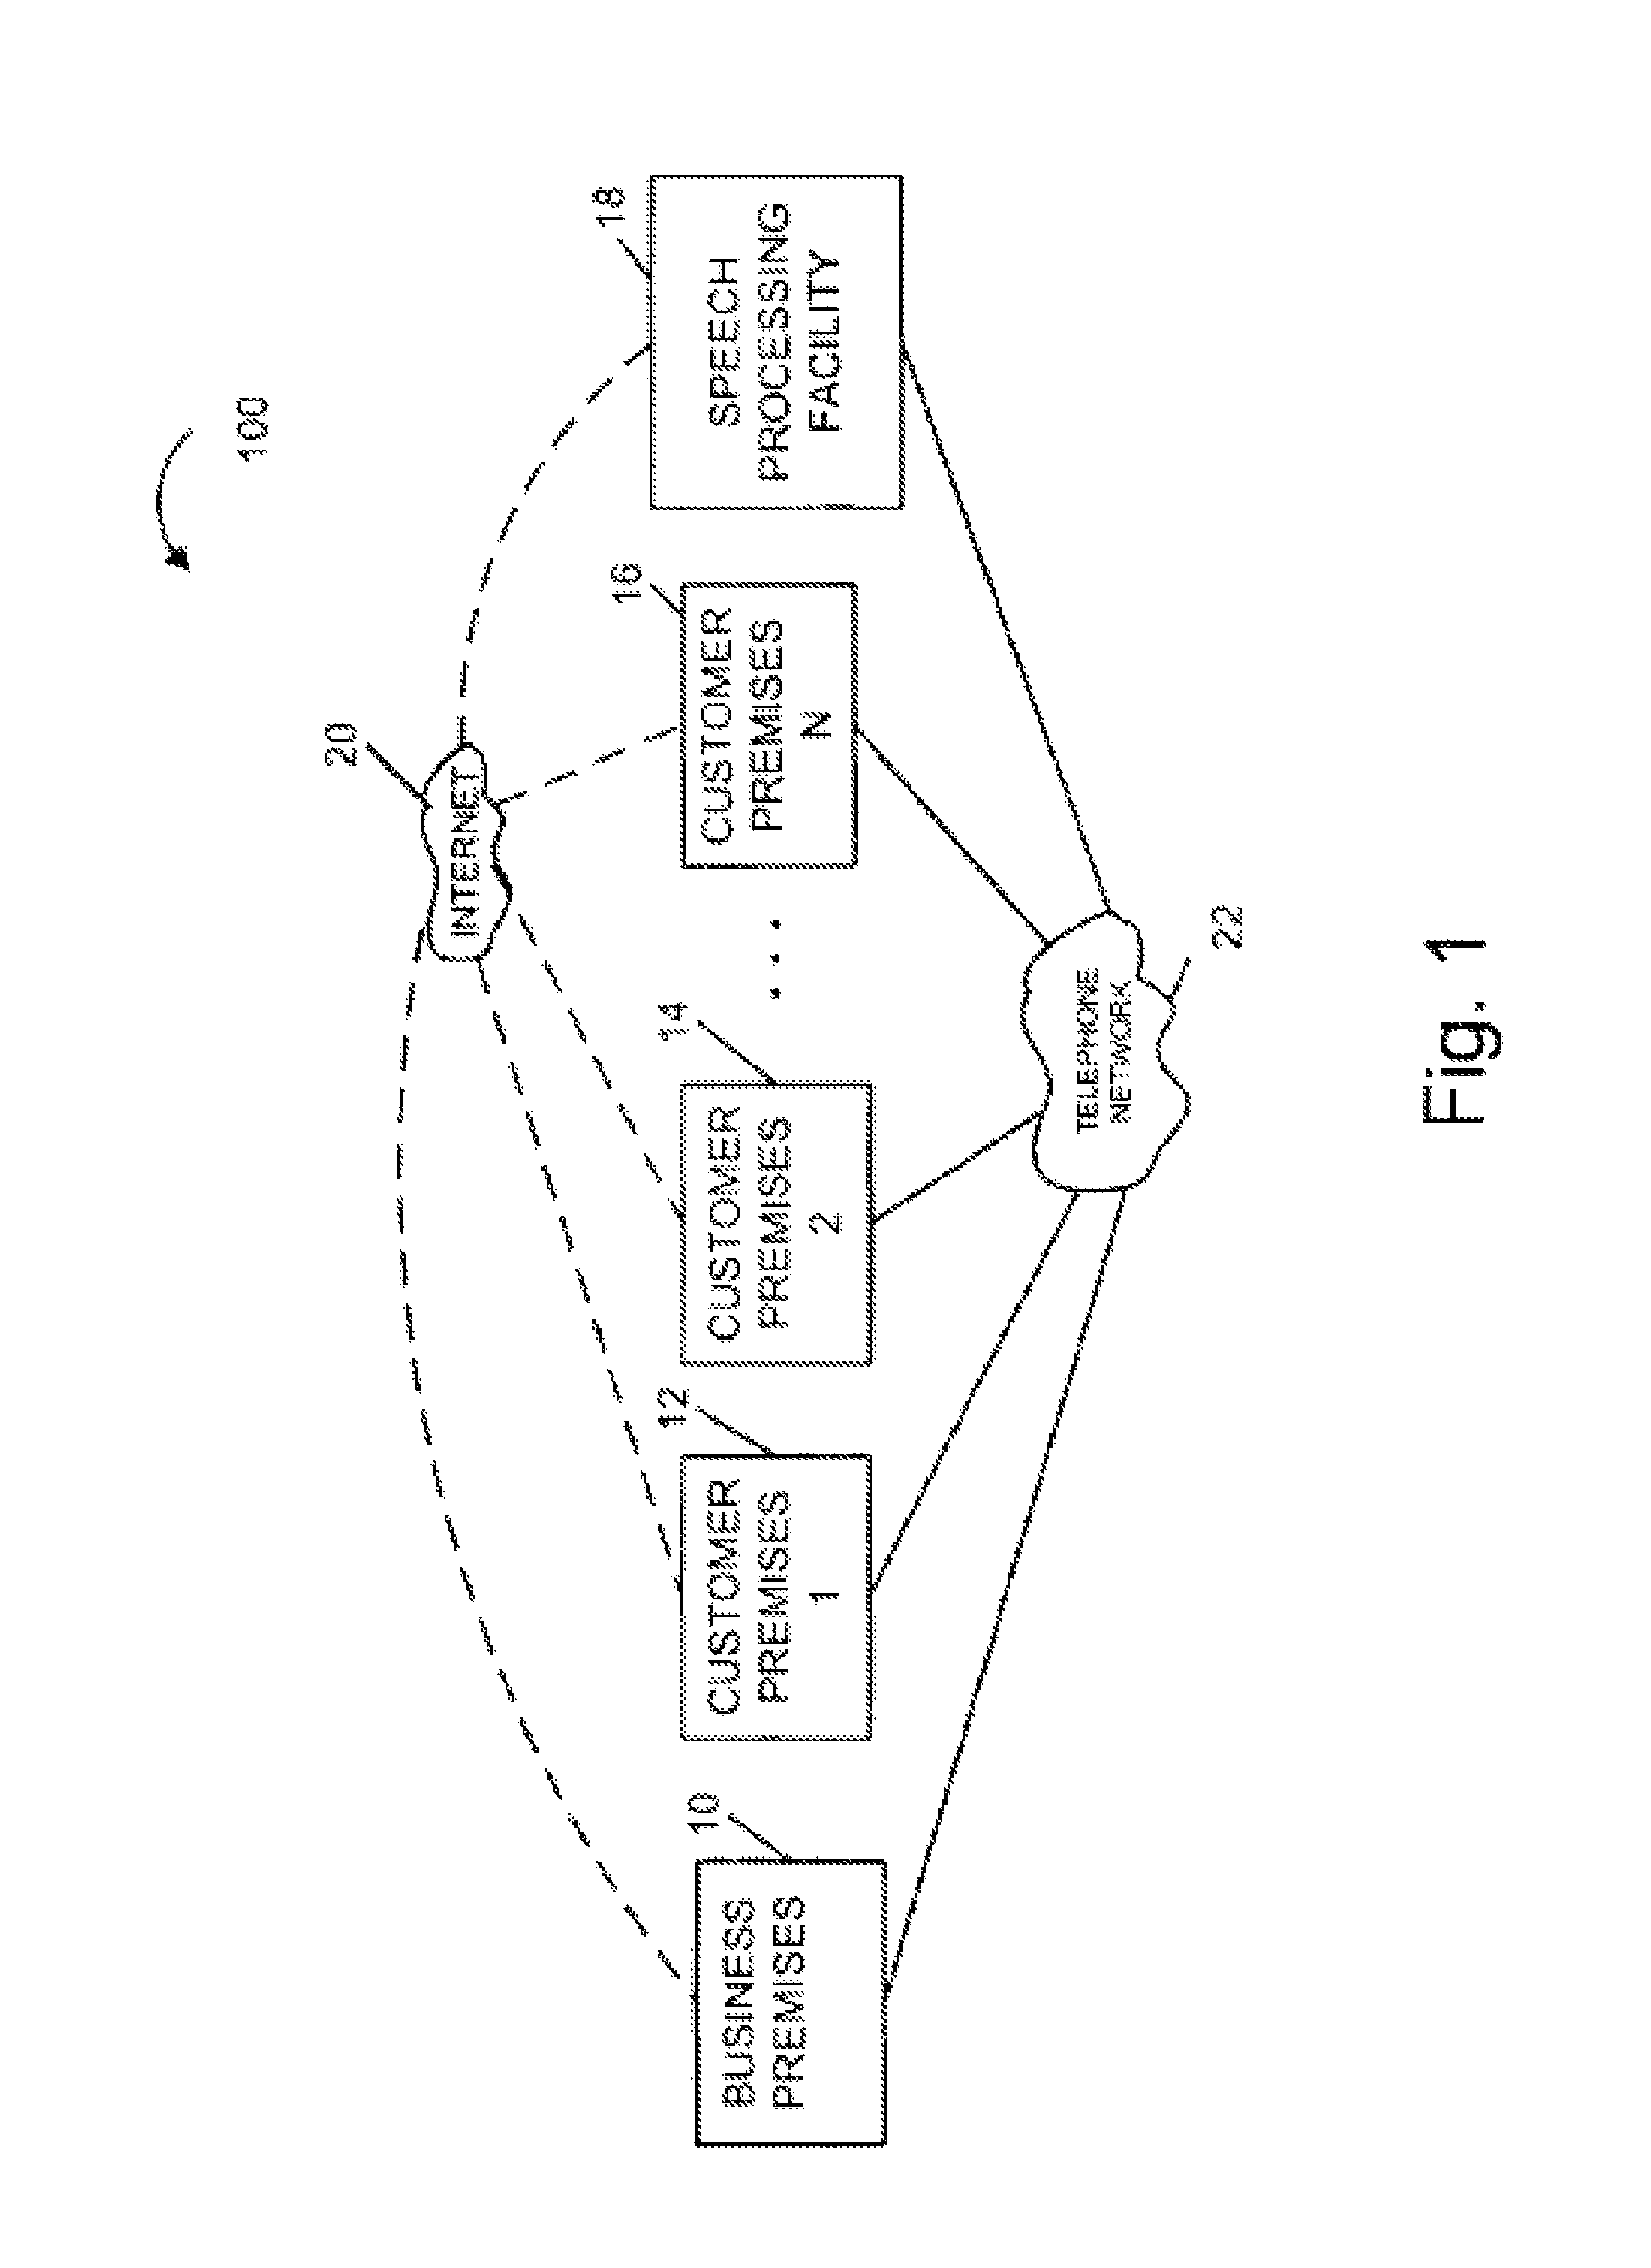 Performing speech recognition over a network and using speech recognition results